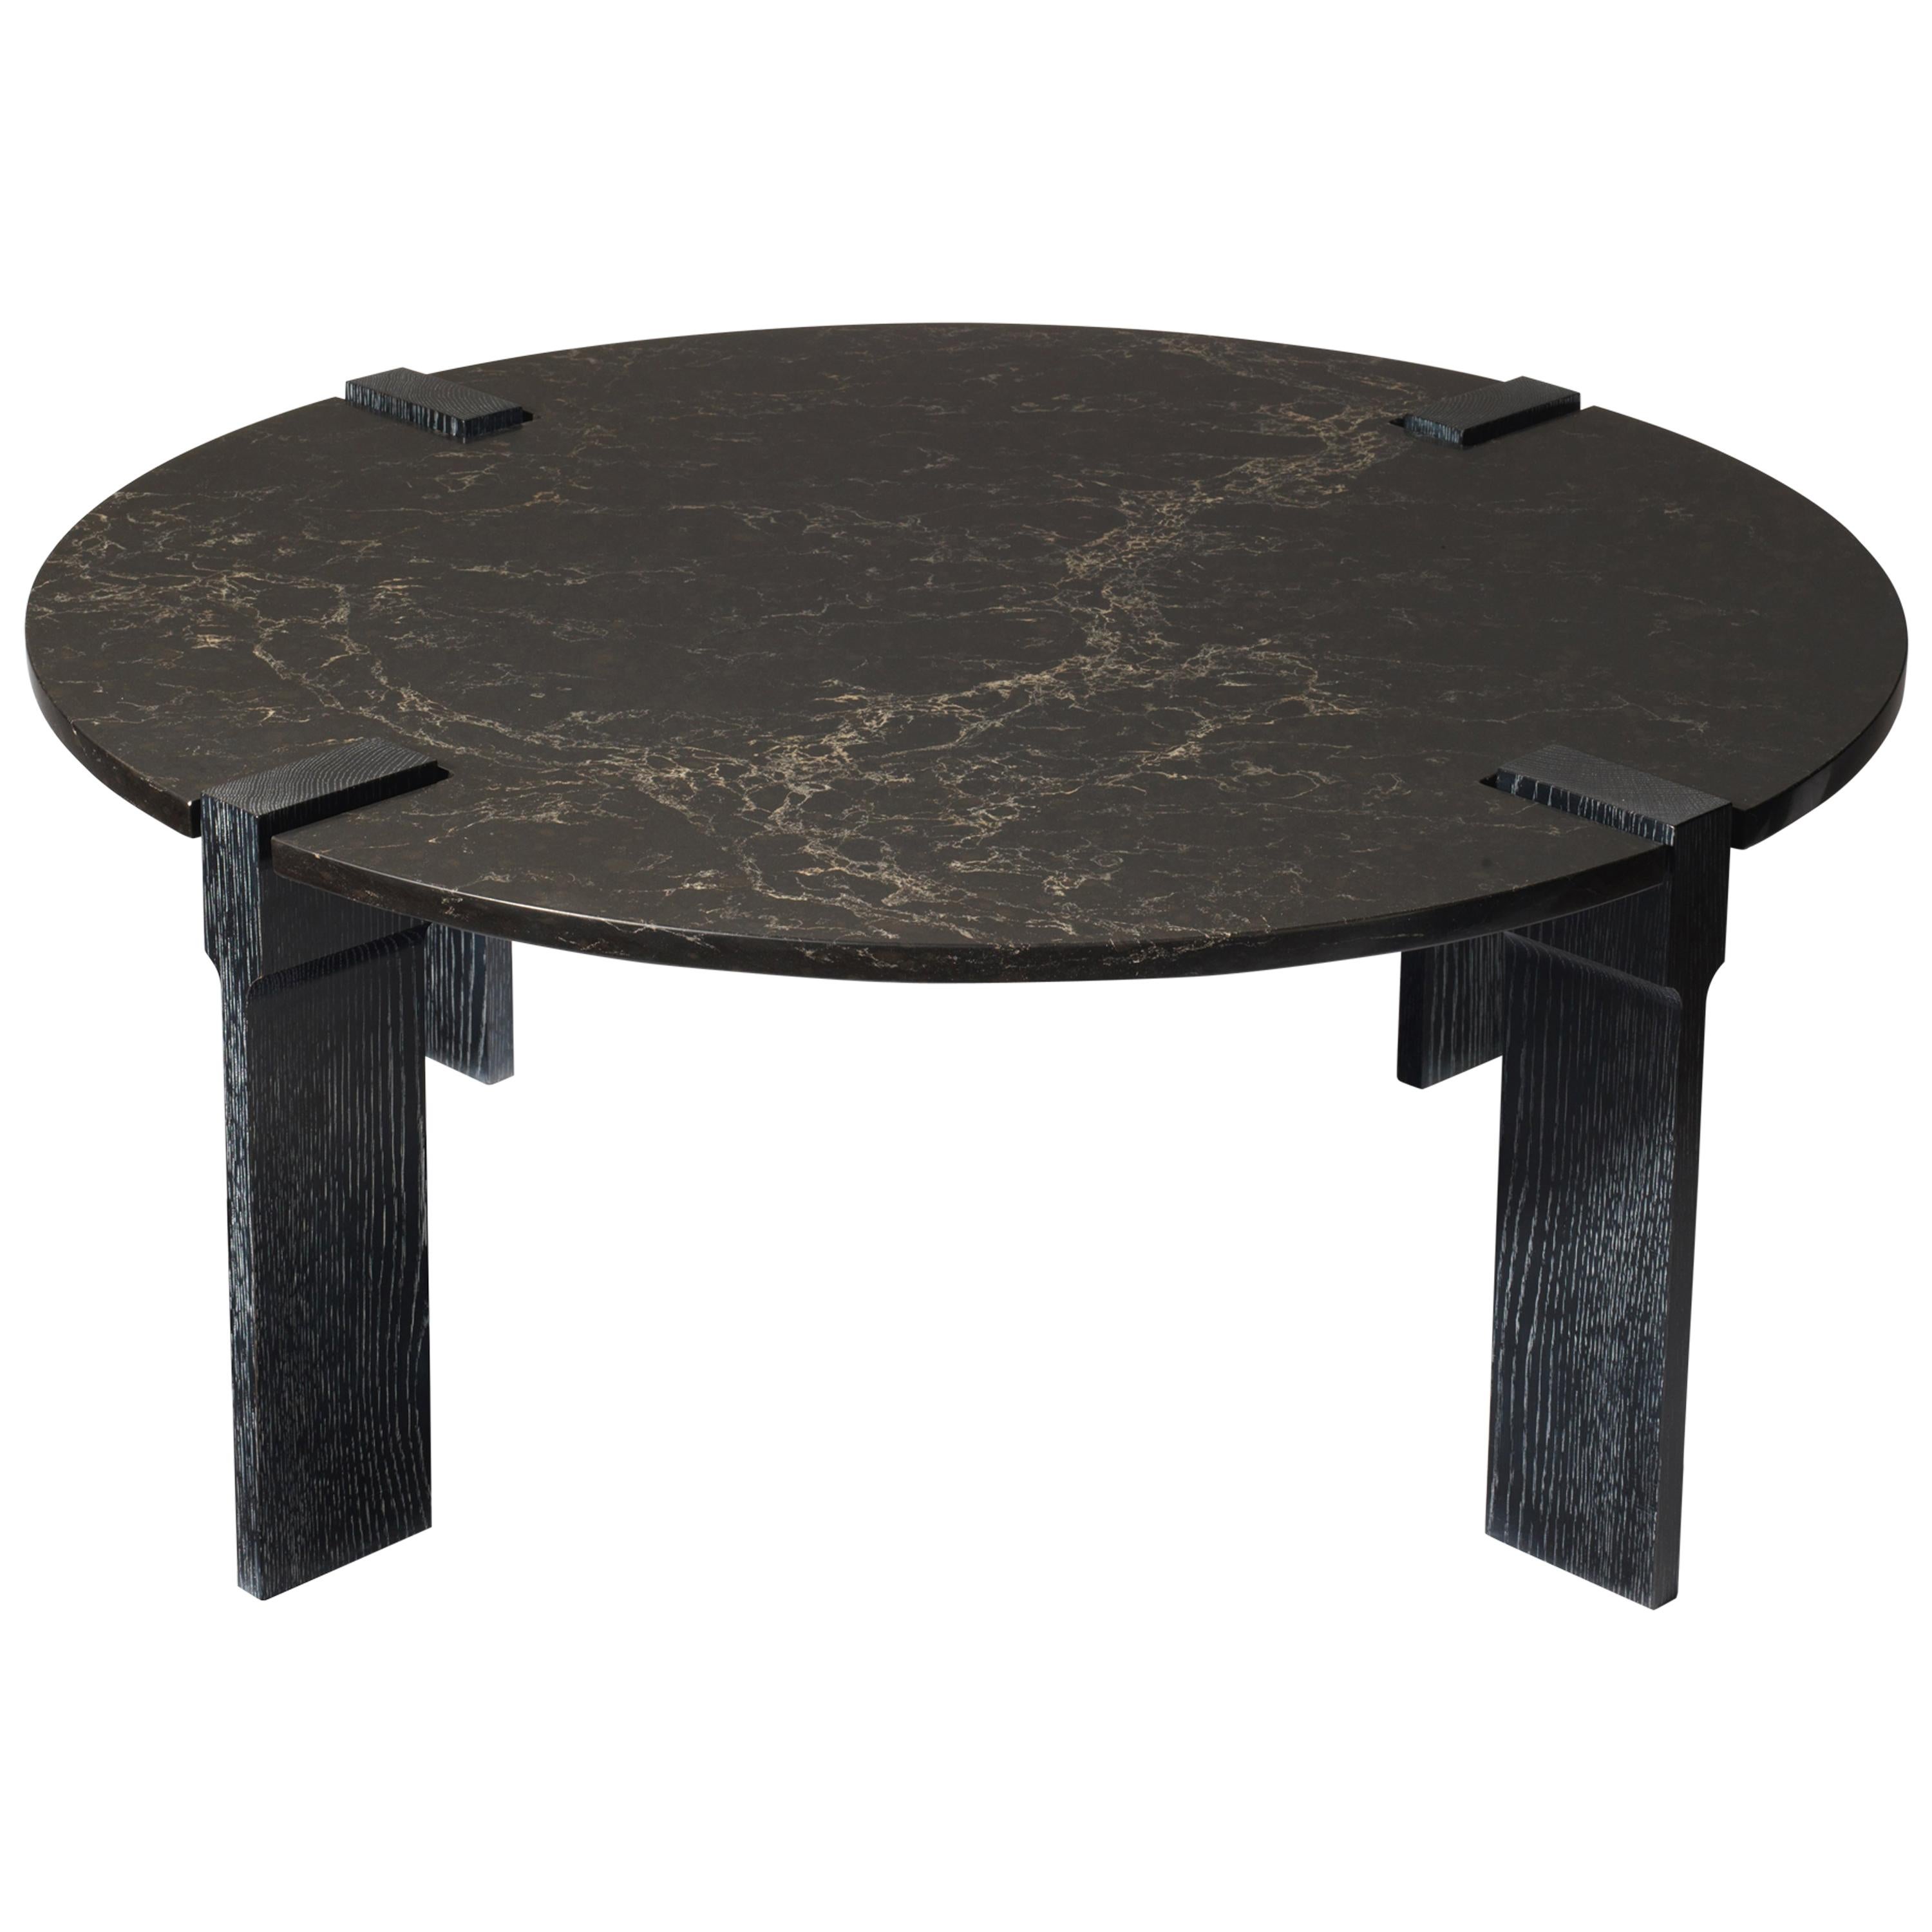 Modern Cocktail Table in Cerused White Oak with Vanilla Noir Caesarstone Top